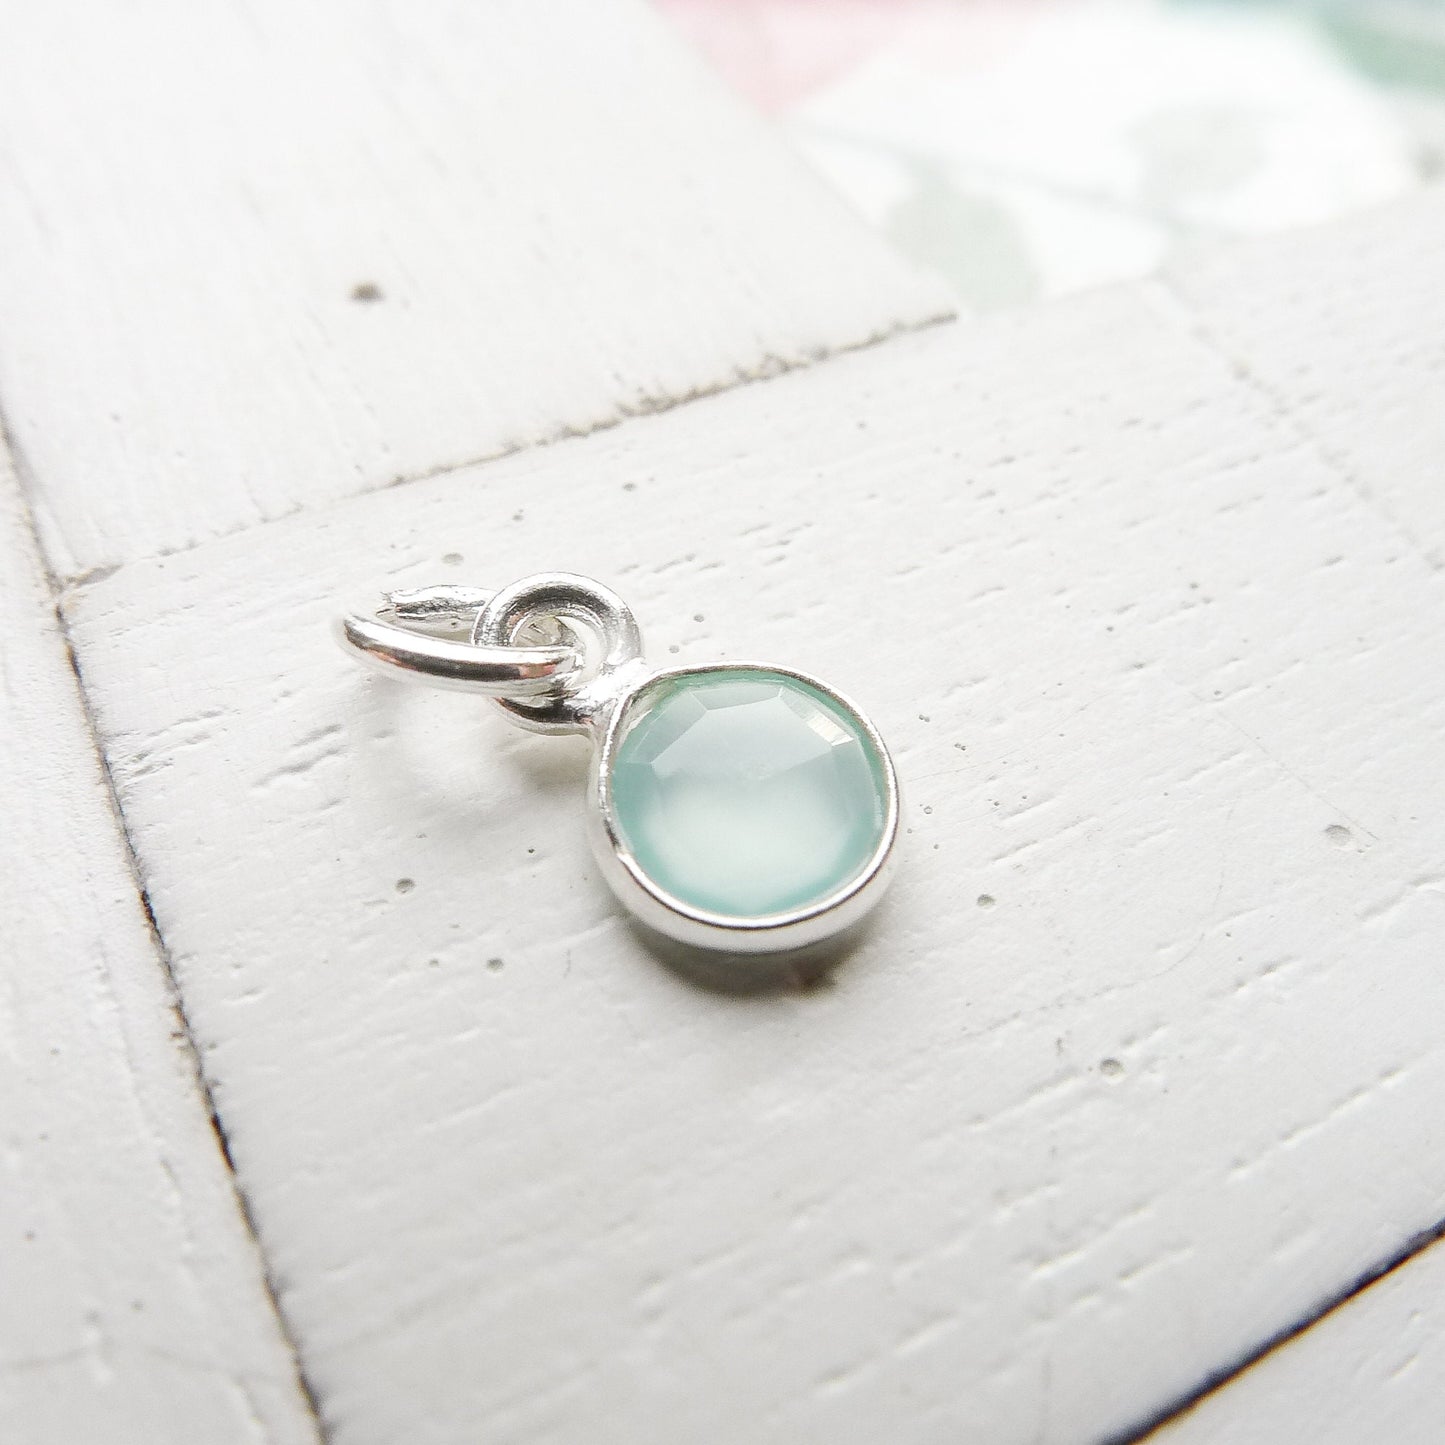 Chalcedony Charm Sea Green Faceted Stone 6mm Gemstone Pendant with Sterling Silver Bezel